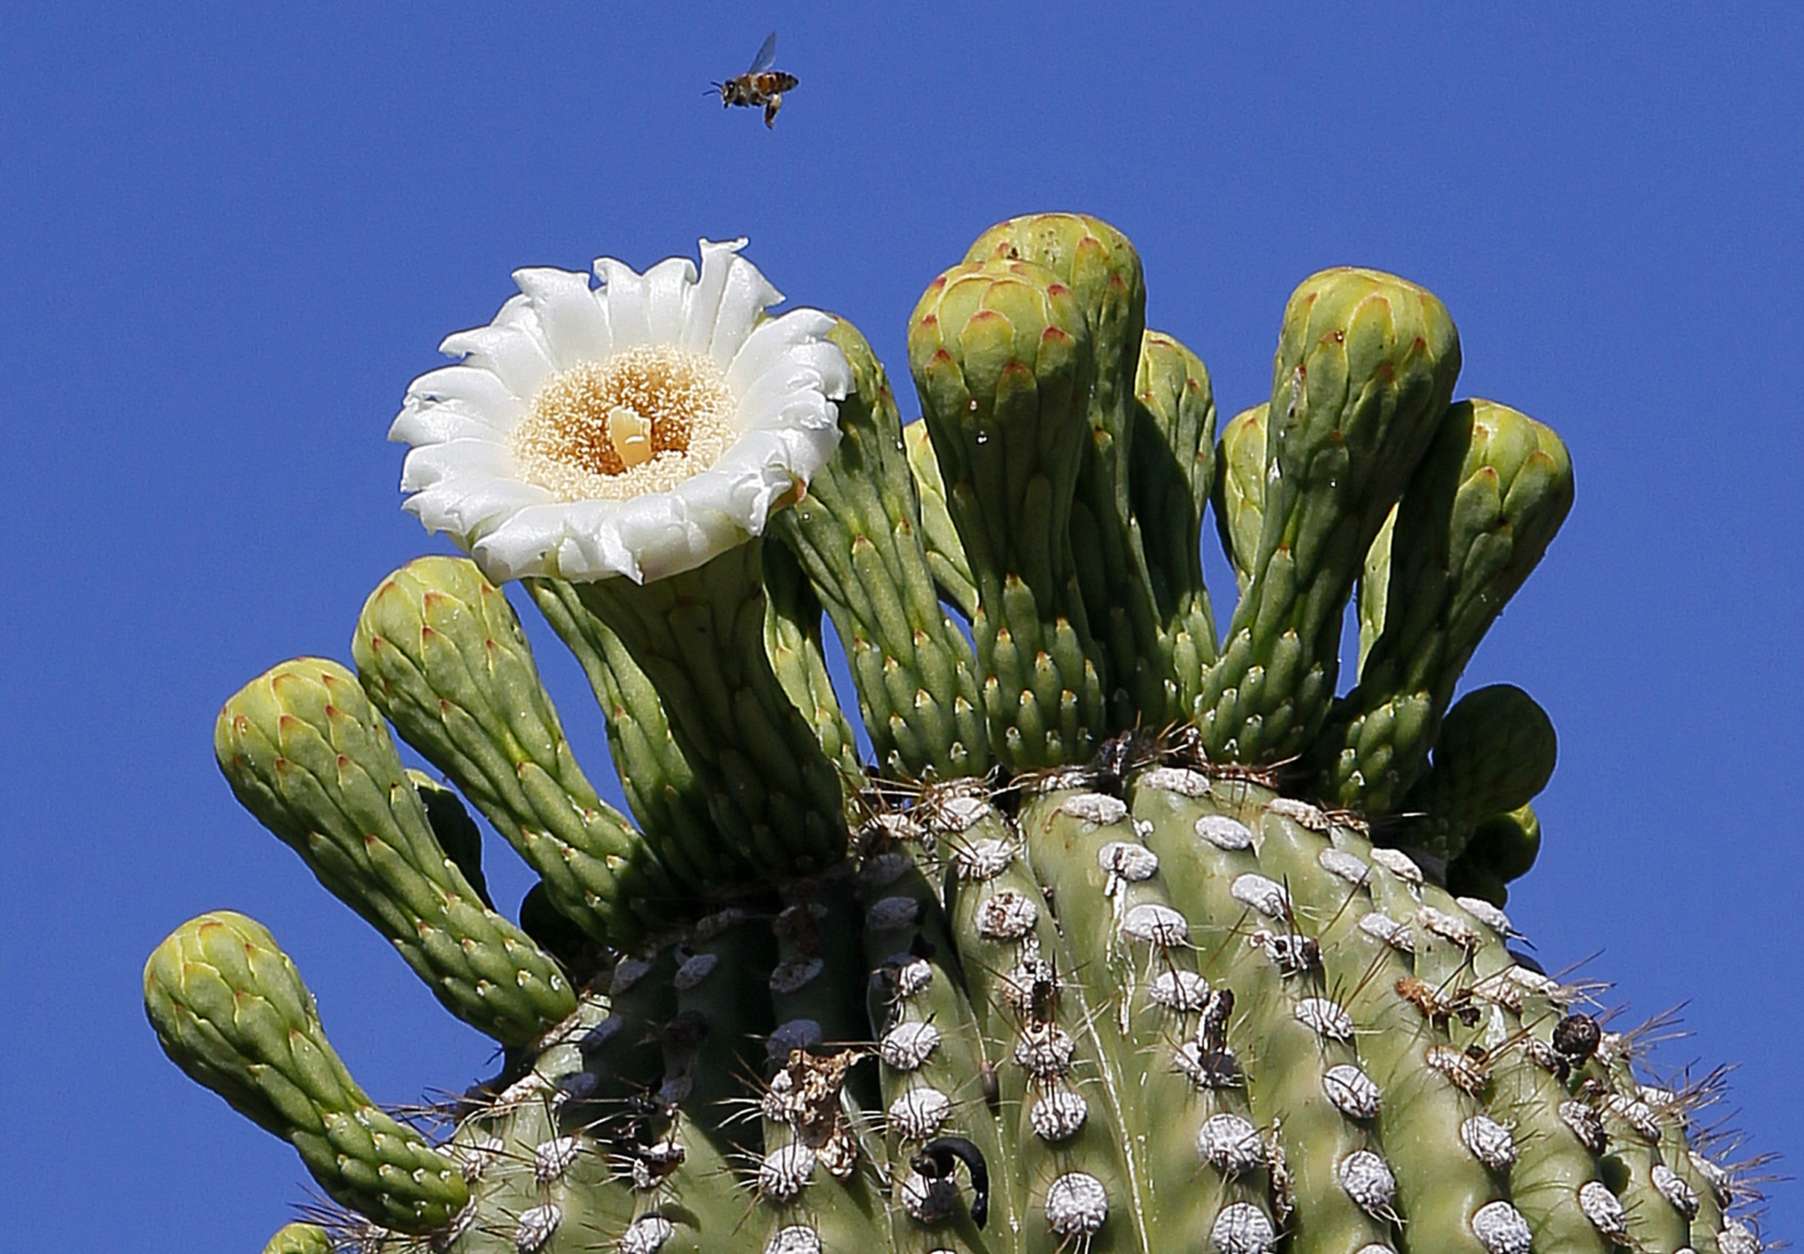 A bee hovers atop a flowering saguaro cactus Wednesday, May 2, 2012 at the Desert Botanical Gardens in Phoenix. The saguaro cactus only grows in the Sonoran Desert and flowers in late spring. (AP Photo/Matt York)